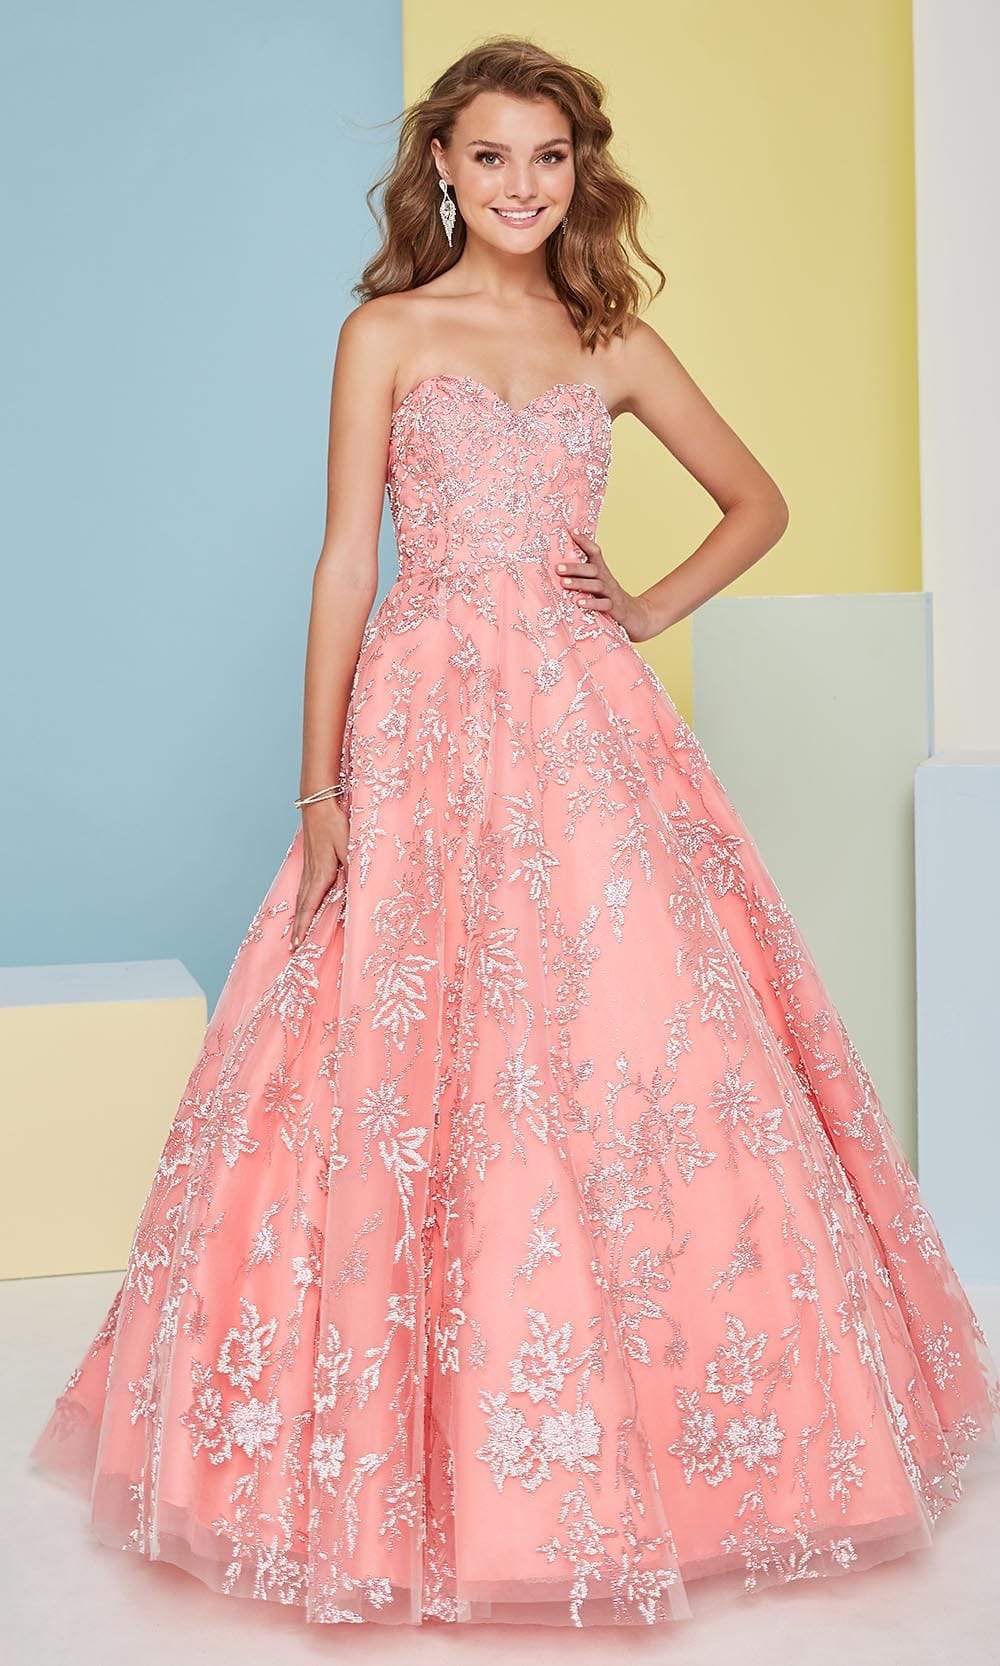 Tiffany Designs - 16471 Strapless Floral Glitter Ornate A-Line Gown Prom Dresses 0 / Rose Pink